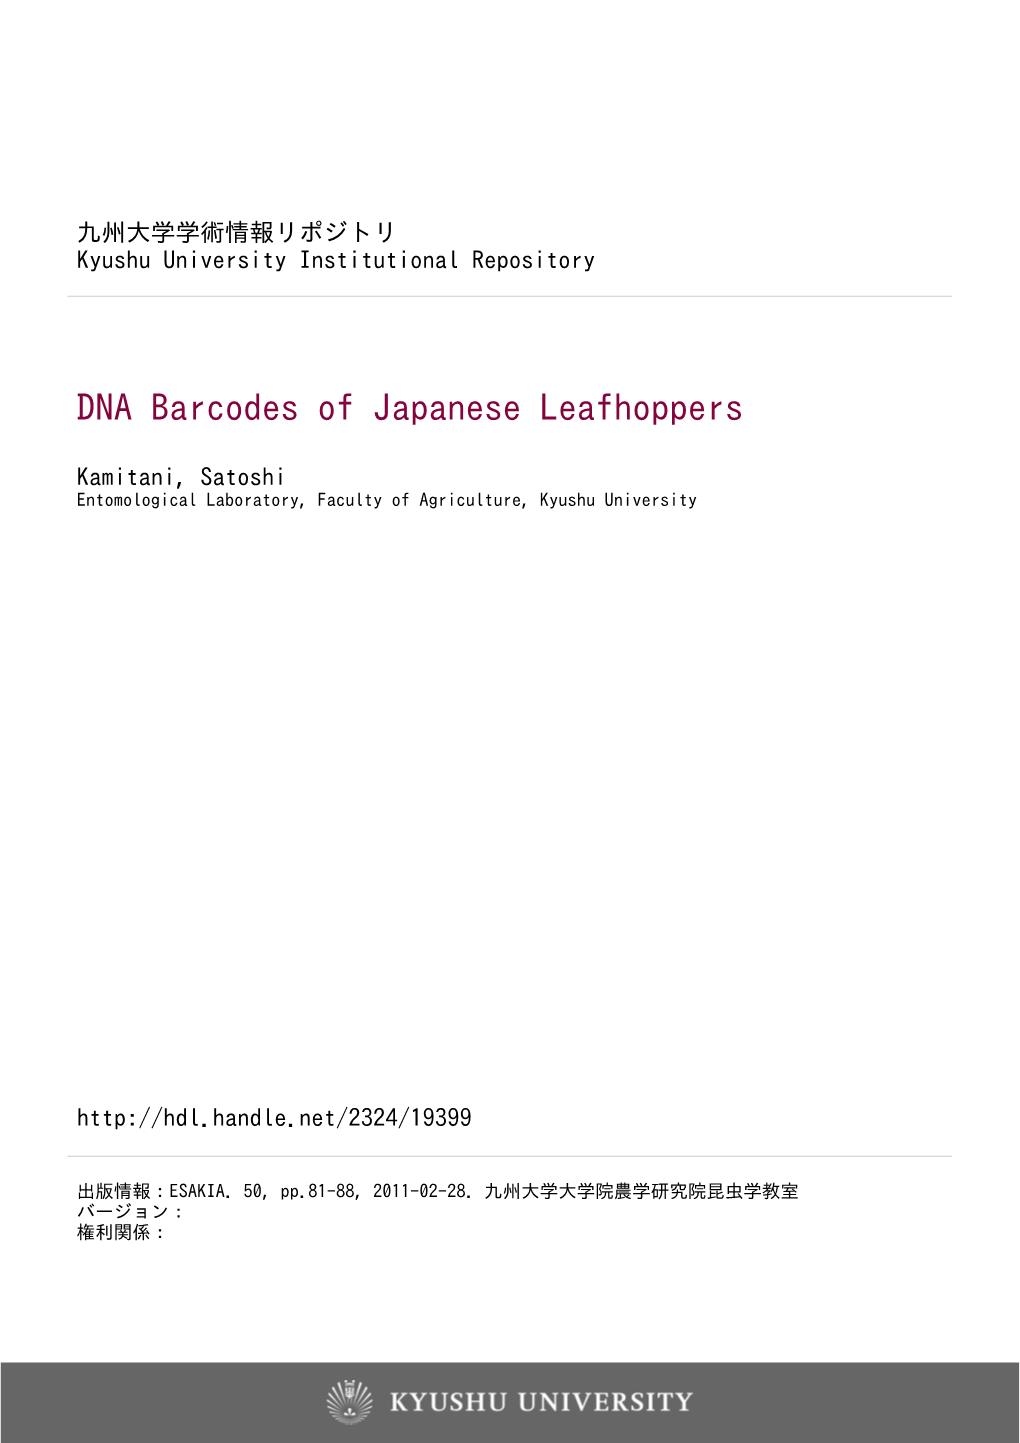 DNA Barcodes of Japanese Leafhoppers